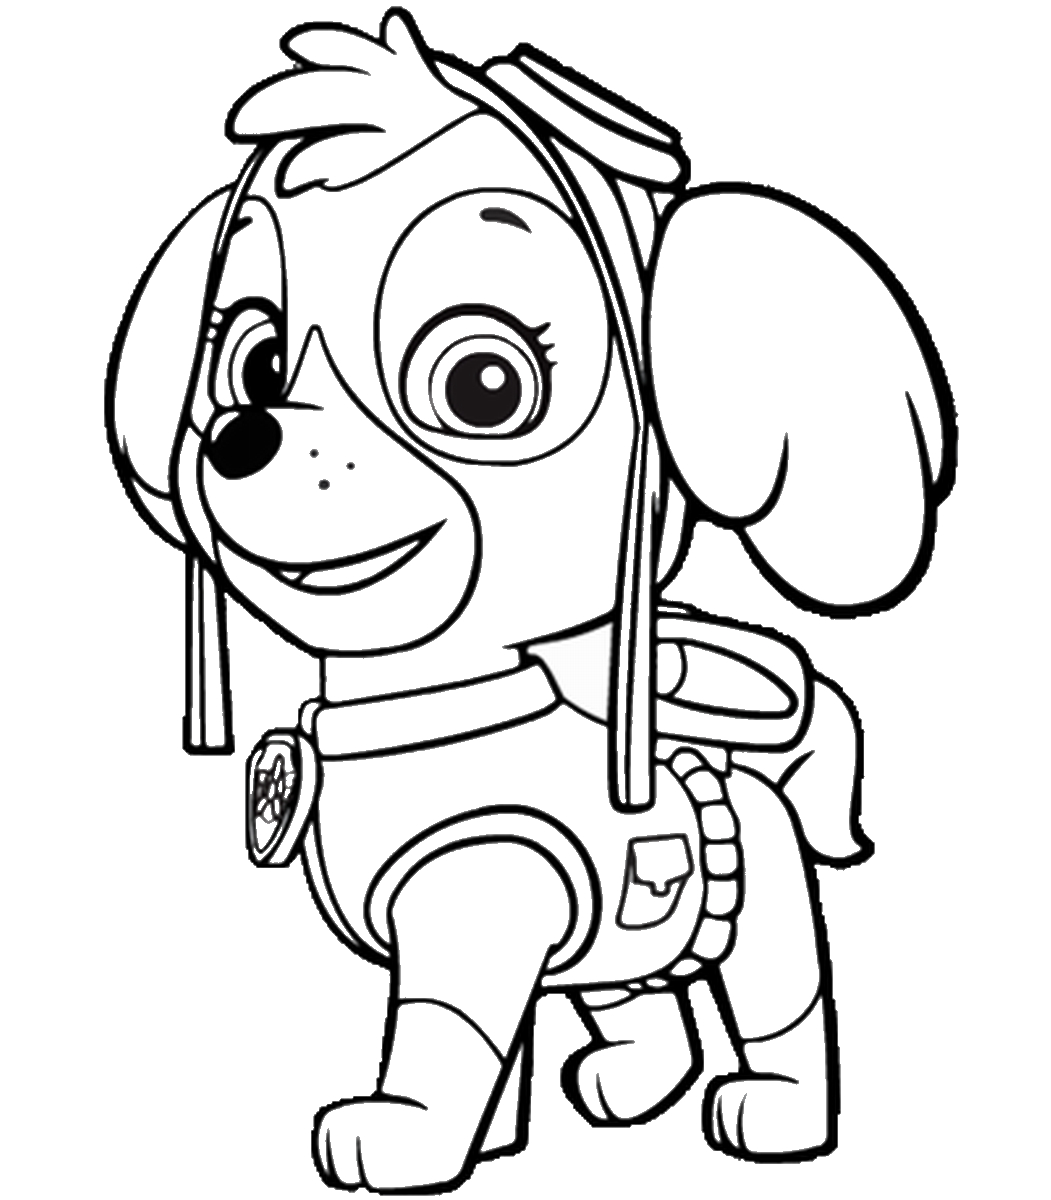 Paw Patrol Coloring Pages - Best Coloring Pages For Kids - Free Printable Paw Patrol Coloring Pages